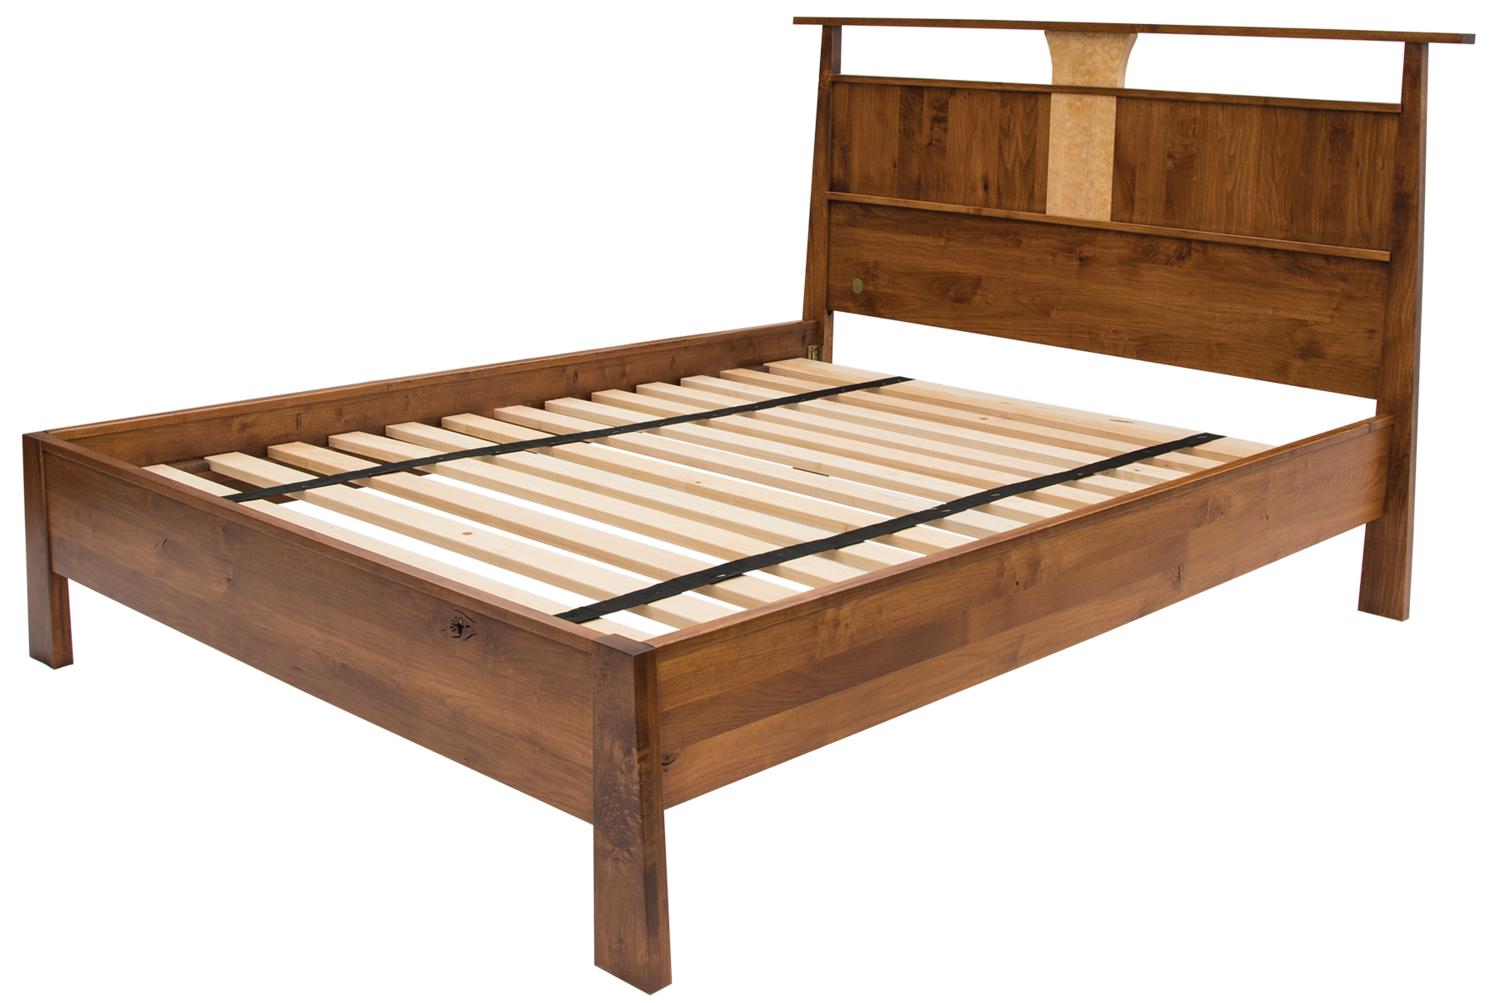 Reflections Limited Edition Queen Maple Bed